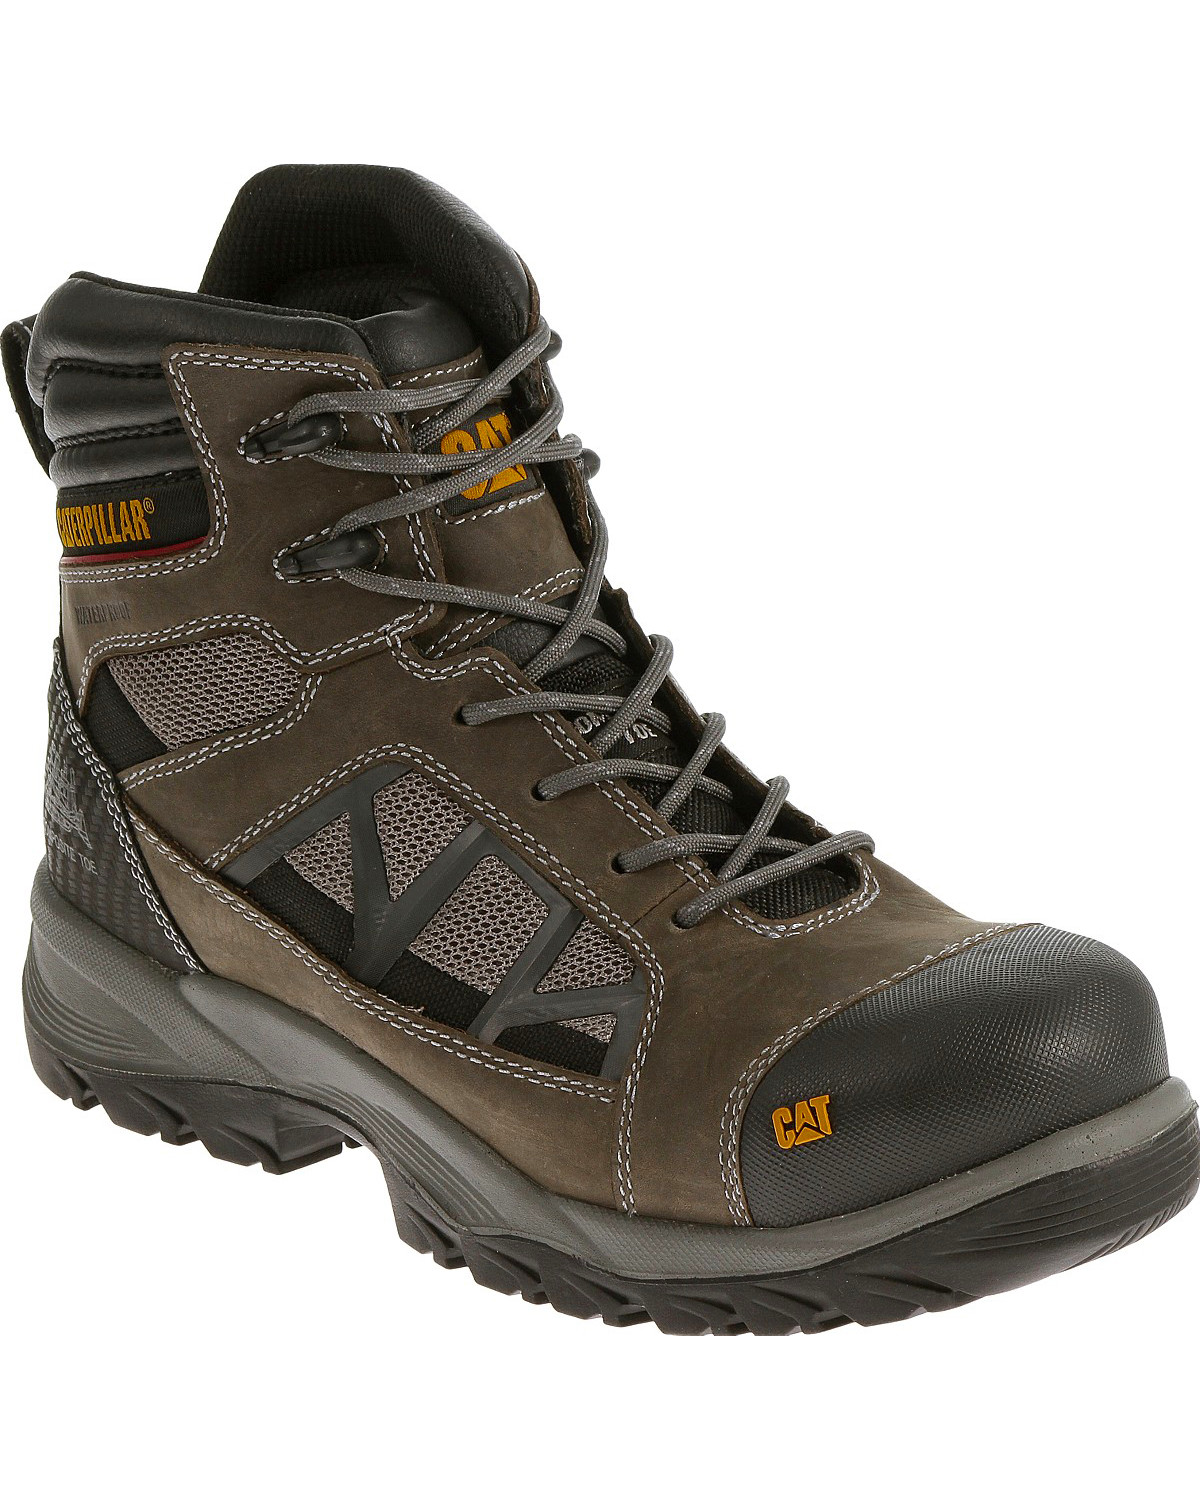 mens grey work boots